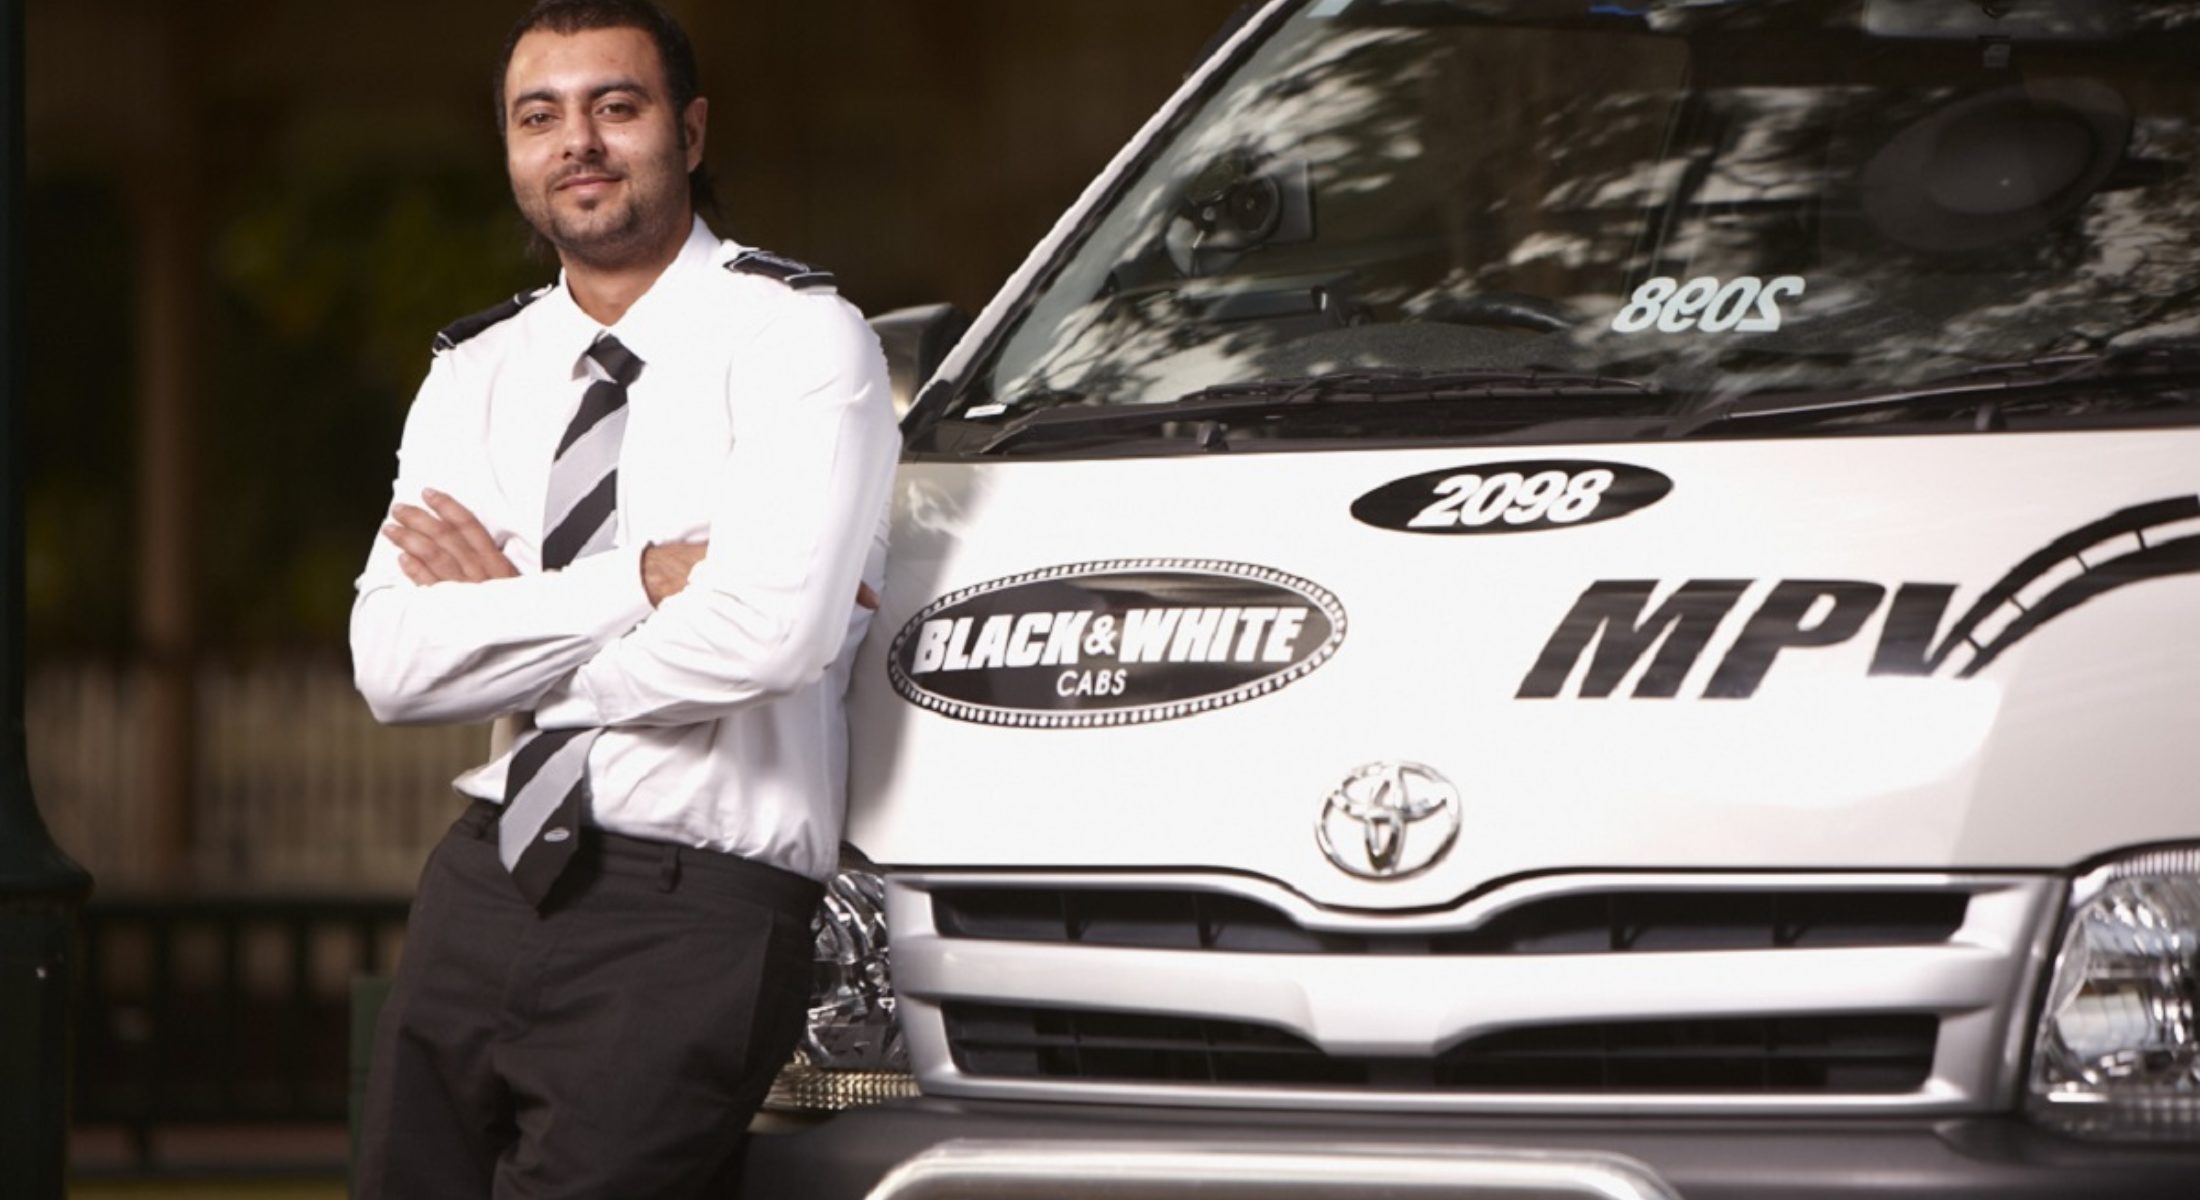 Black & White Cabs offer a Maxi Taxi service